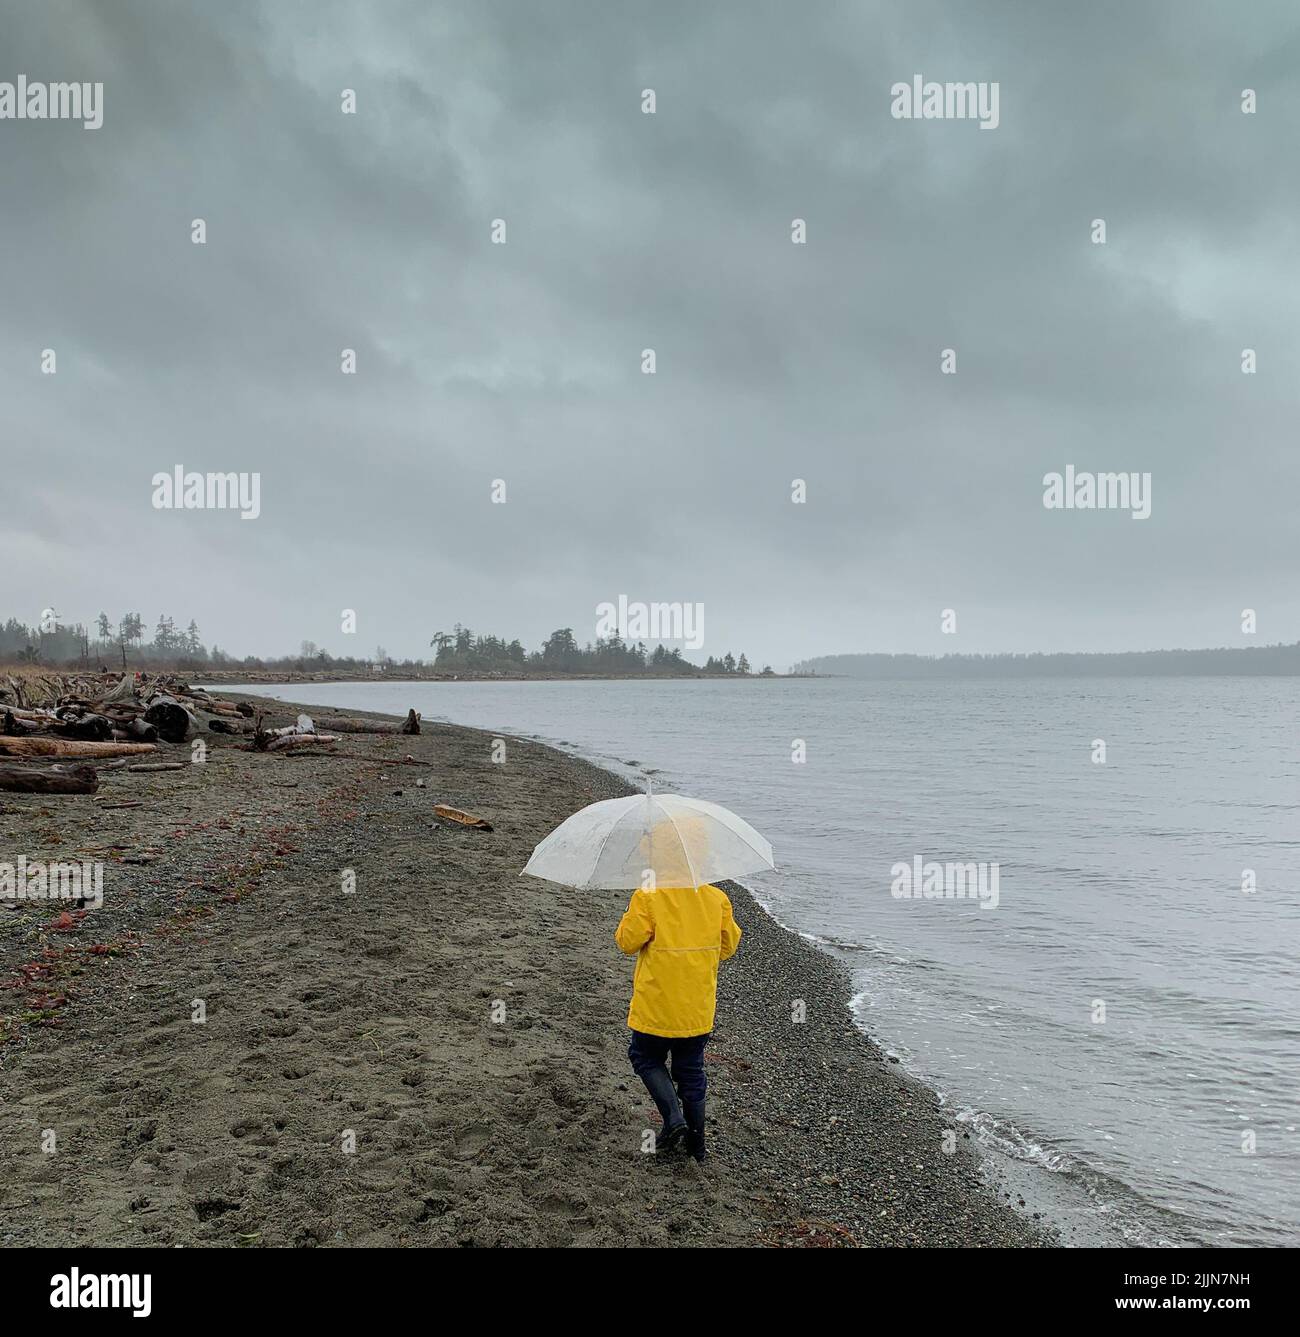 Rear view of a person carrying an umbrella walking on the beach in the rain, British Columbia, Canada Stock Photo